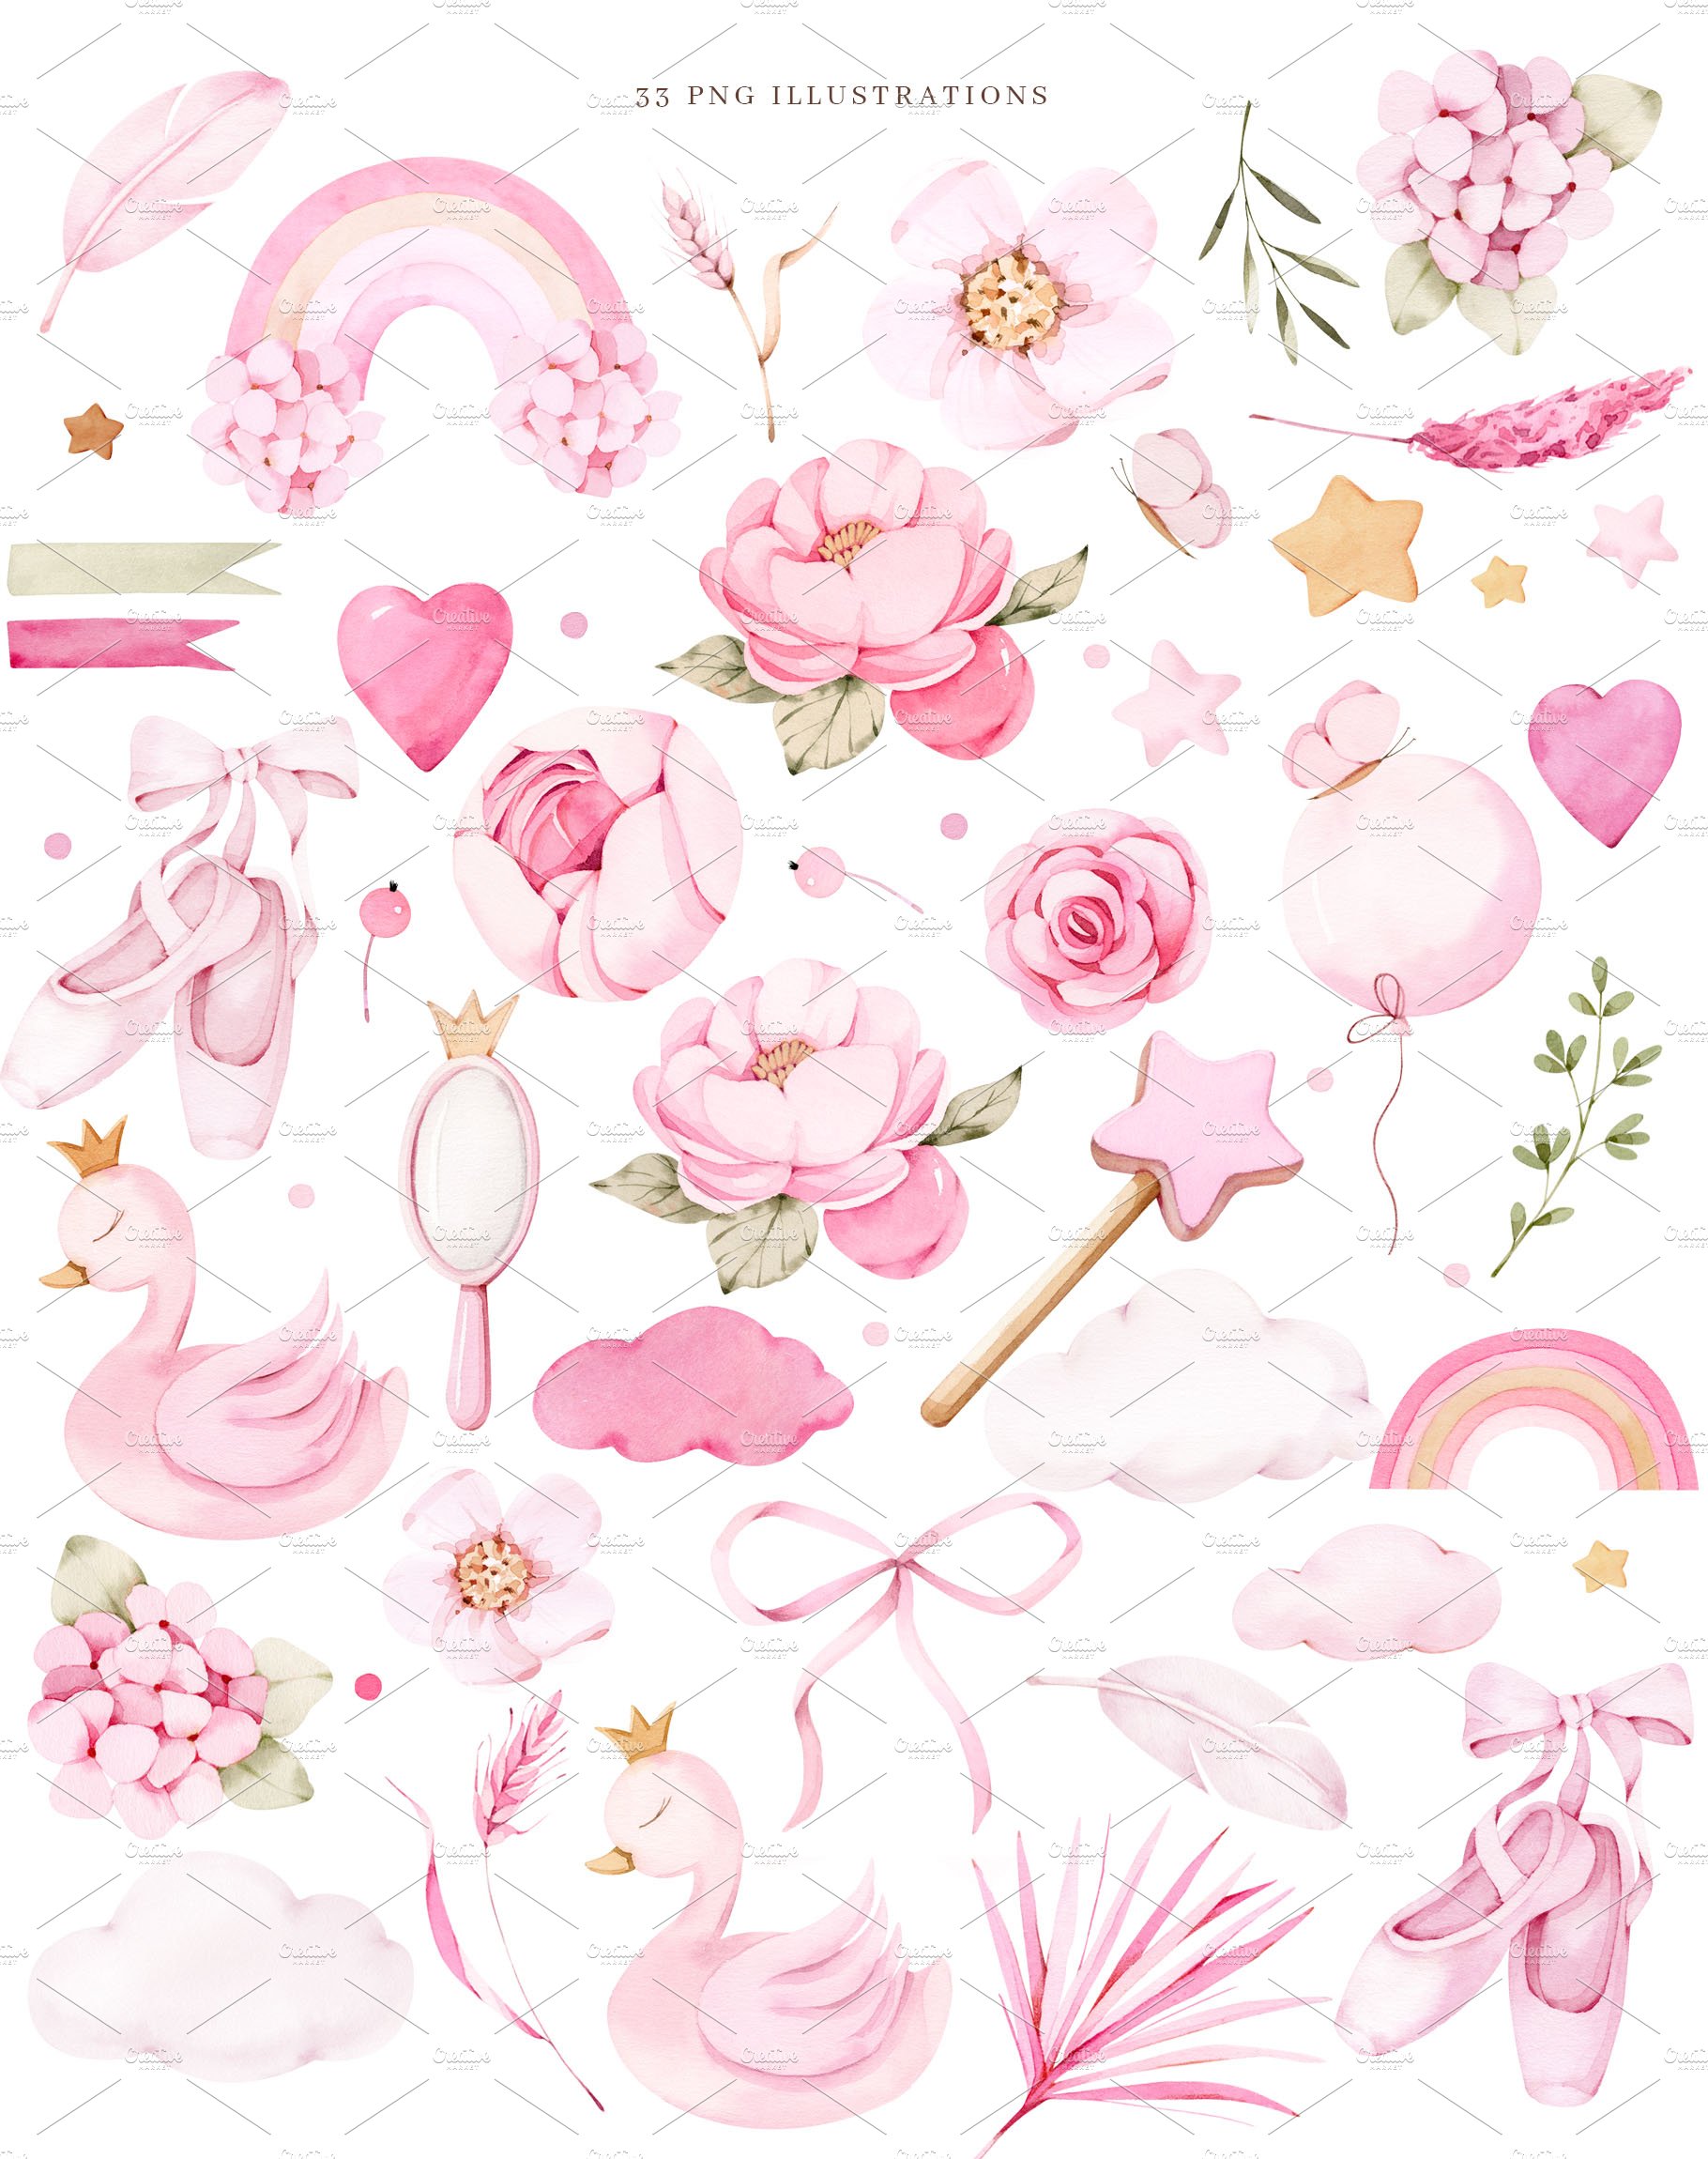 A lot of cute pink elements for creating delicate composition.